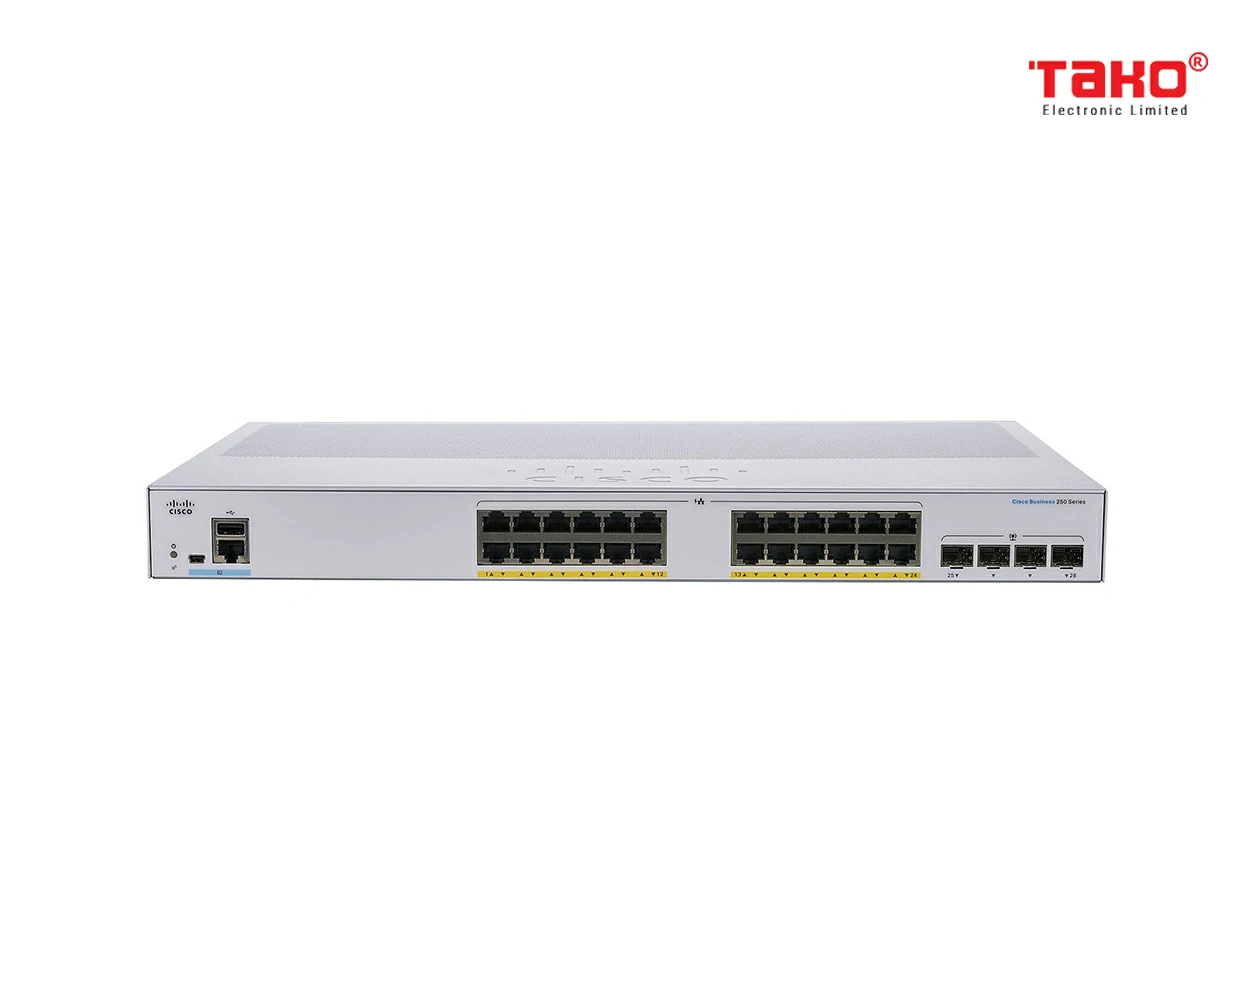 Cisco CBS250-24FP-4X 24 port 10/100/1000 Mbps PoE Layer 2 manageable web switch 4 x 10 Gbps SFP slots 1